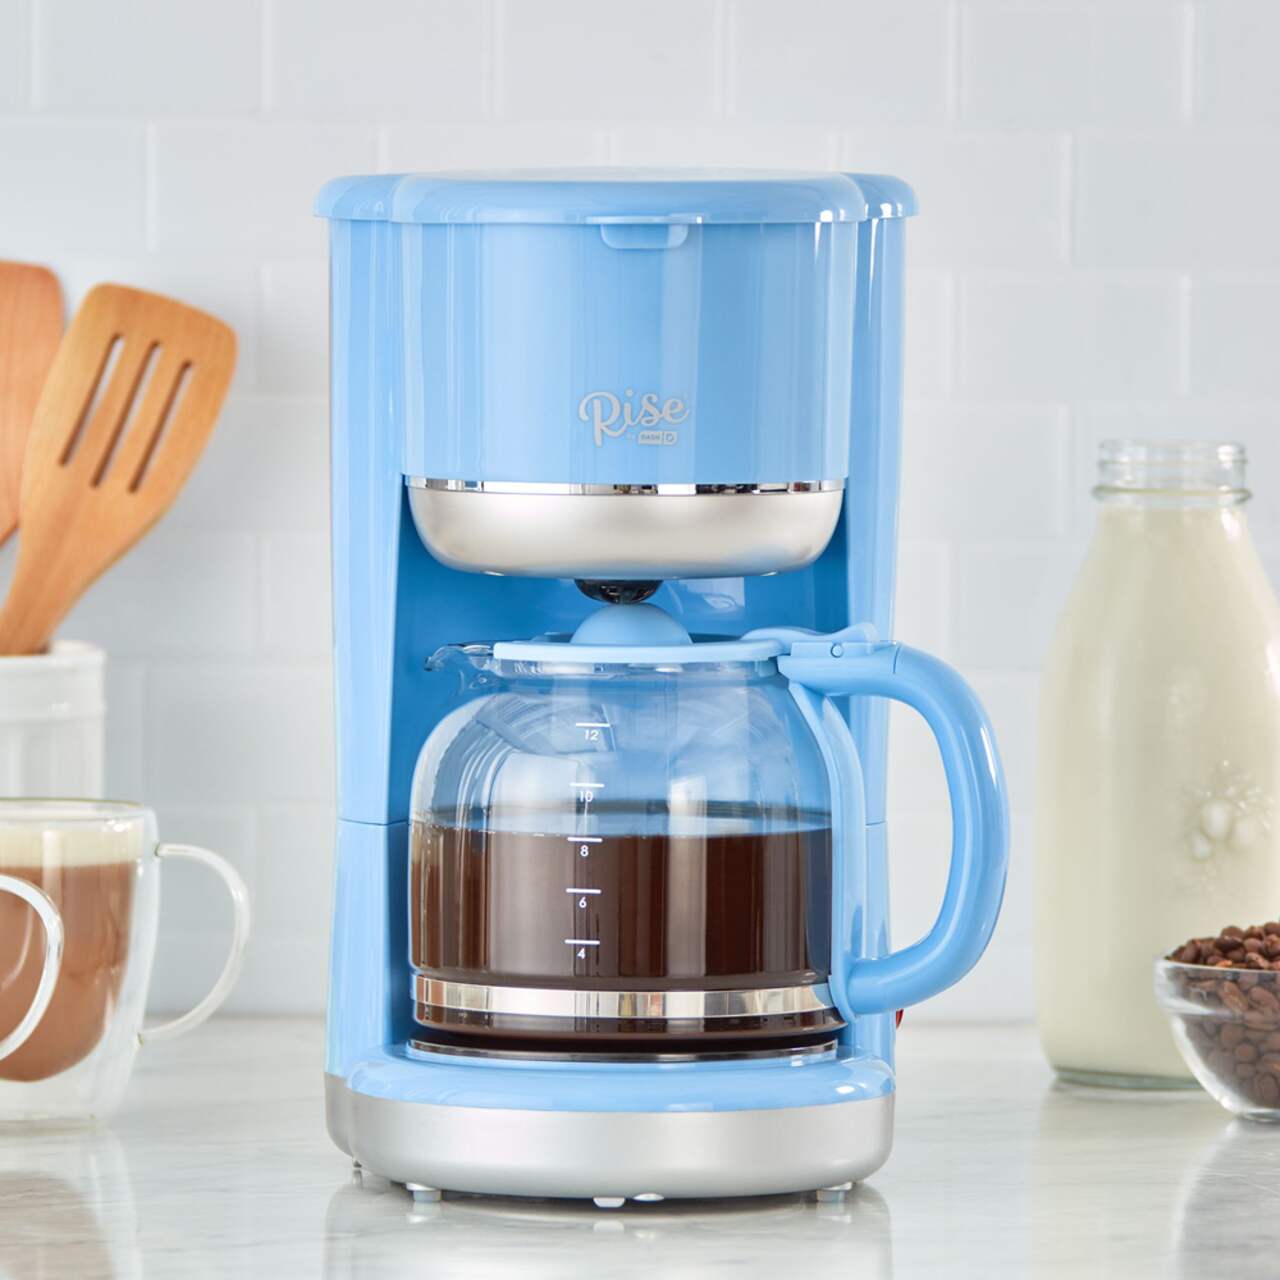  Rise by Dash Coffee Maker Blue Sky : Home & Kitchen